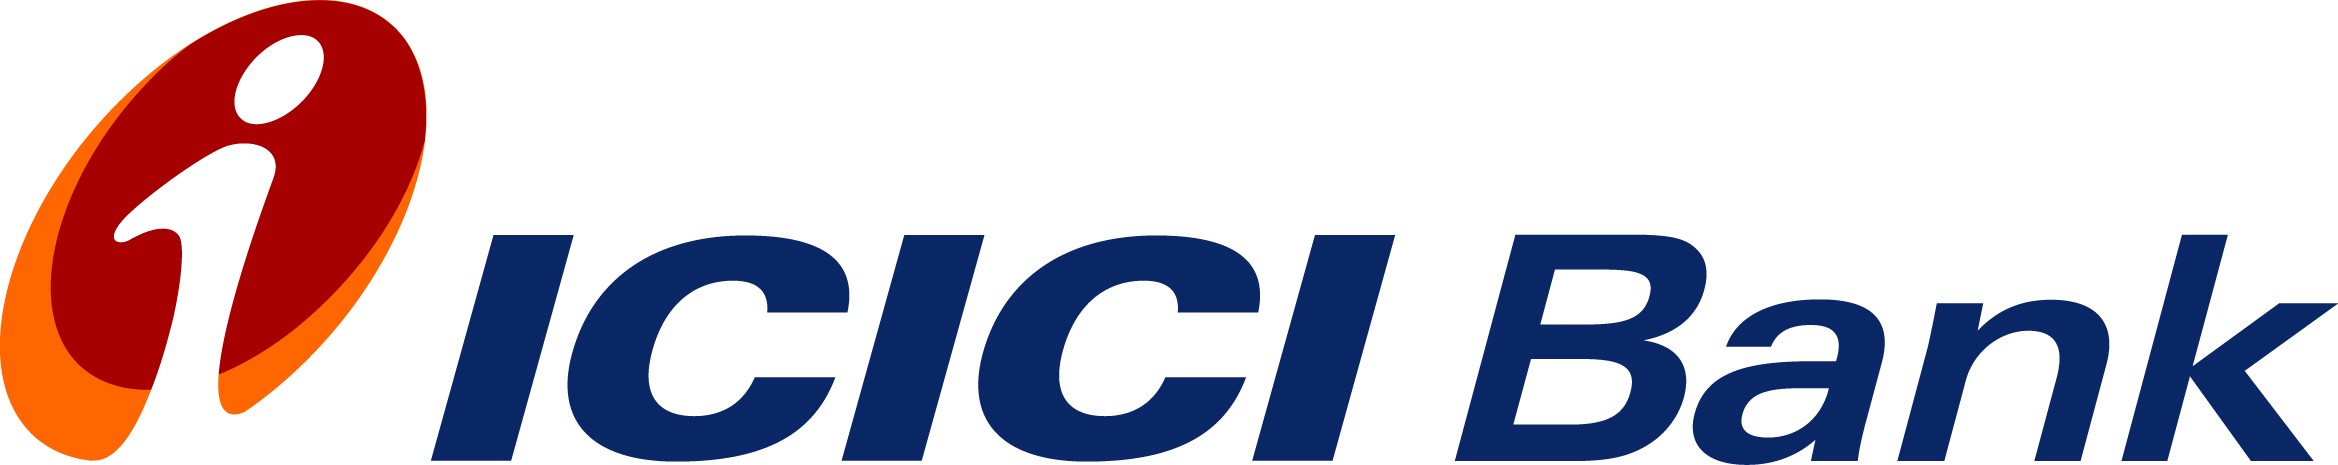 ICICI Bank of India inaugurates contact office in Nepal | Banksnepal ...